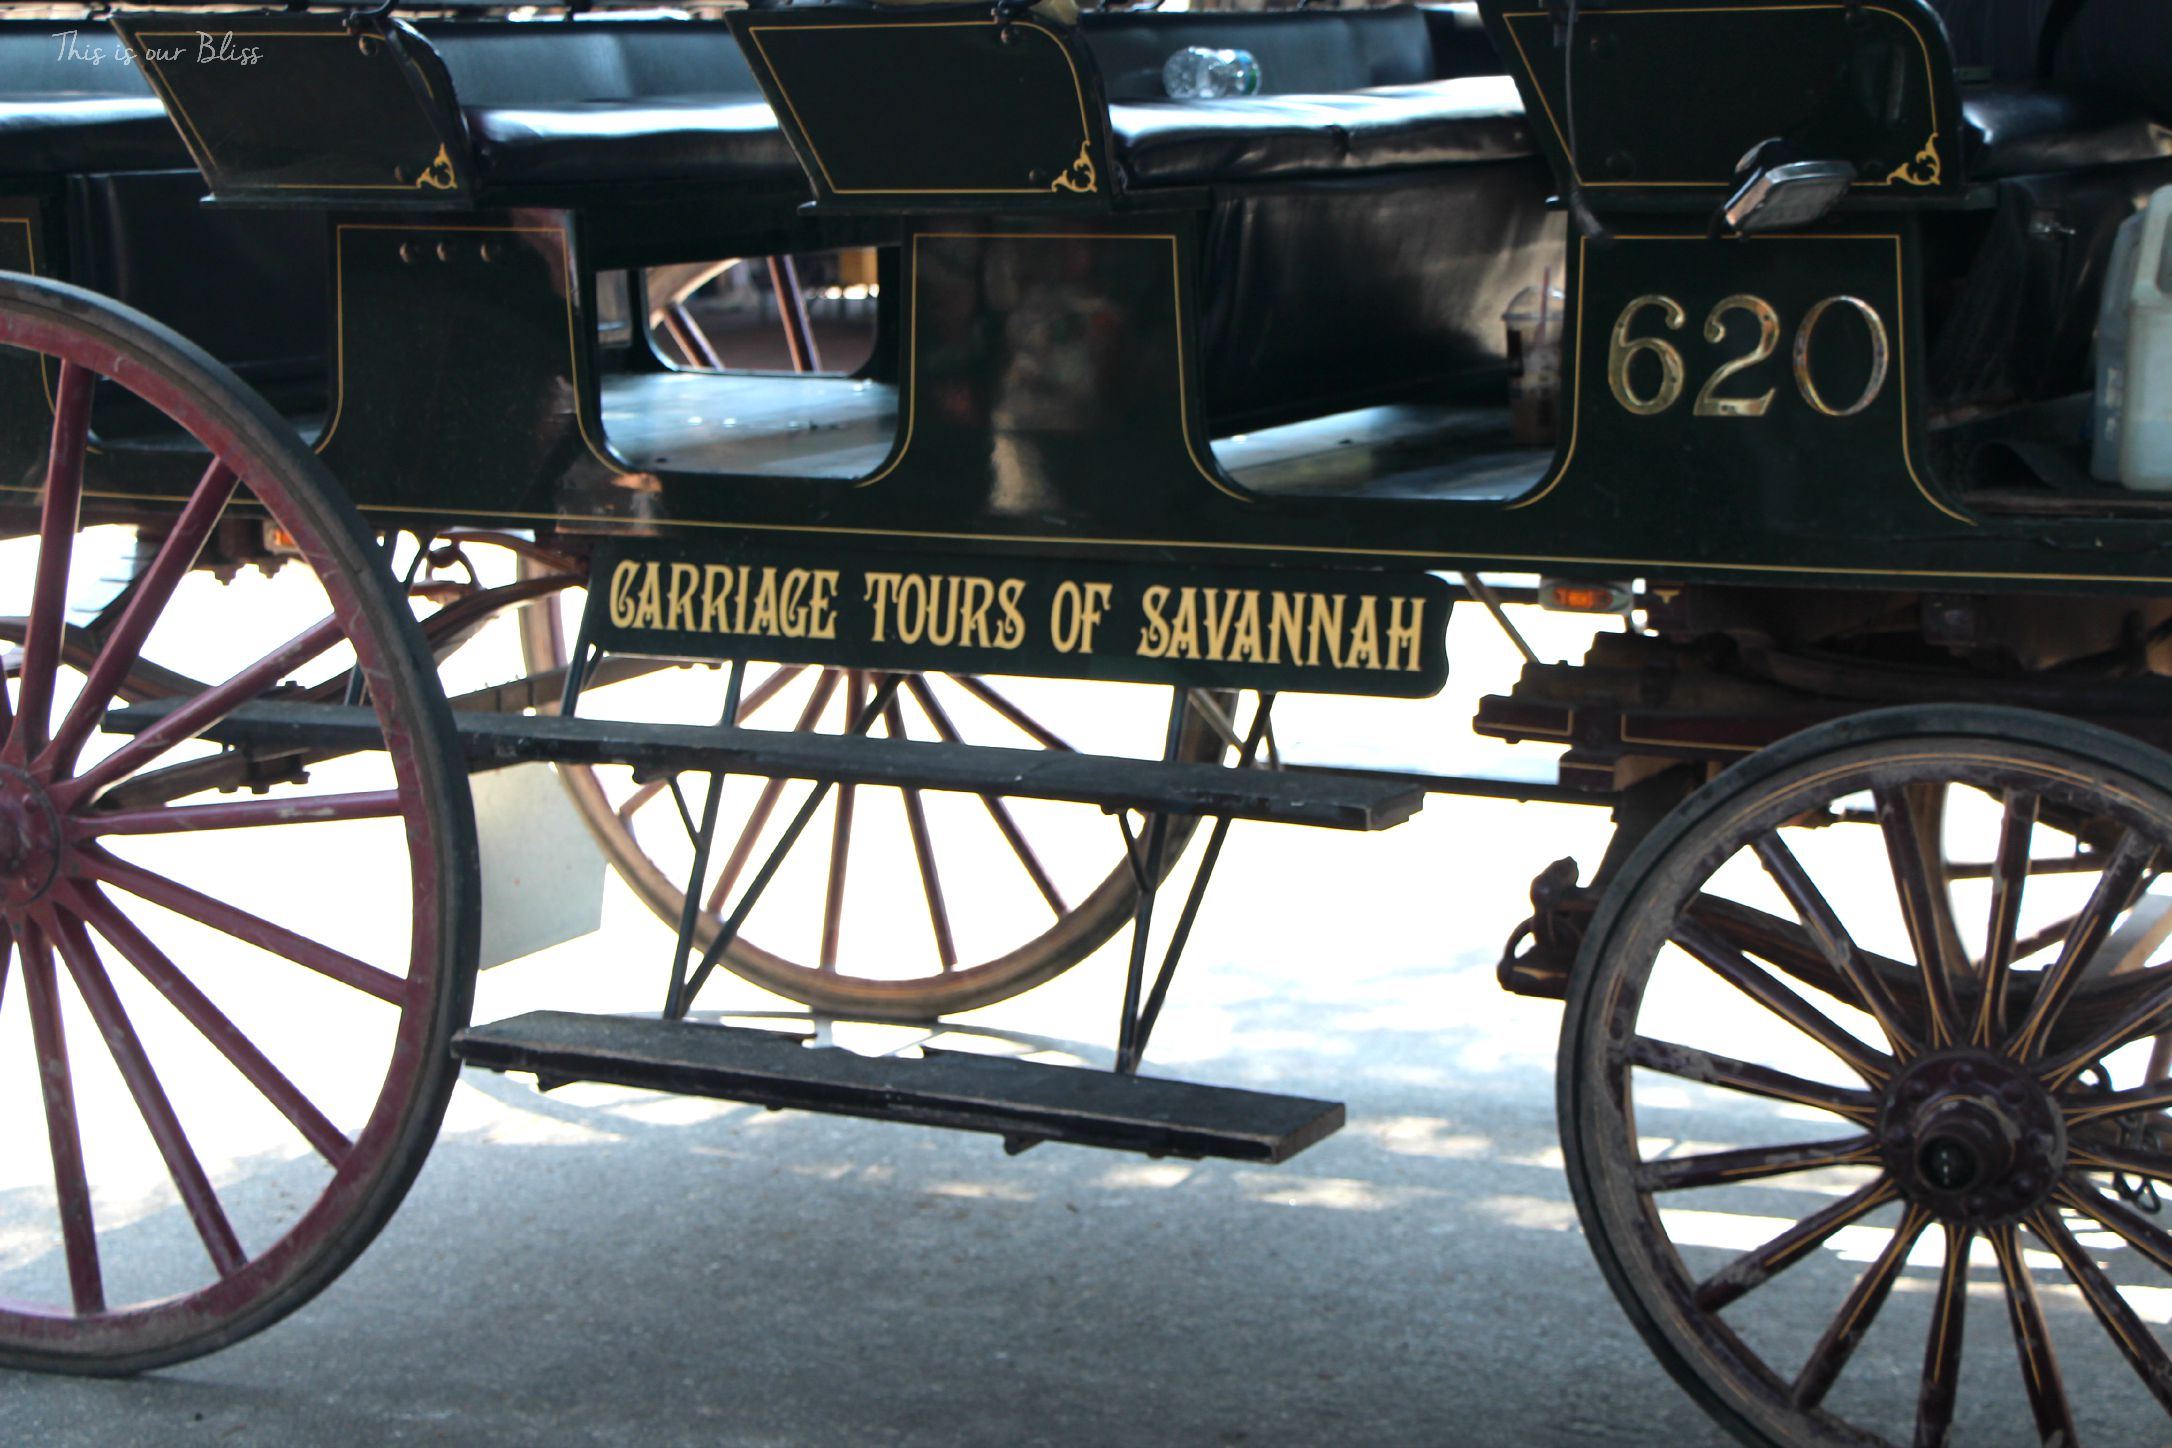 Carriage Tours of Savannah - This is our Bliss